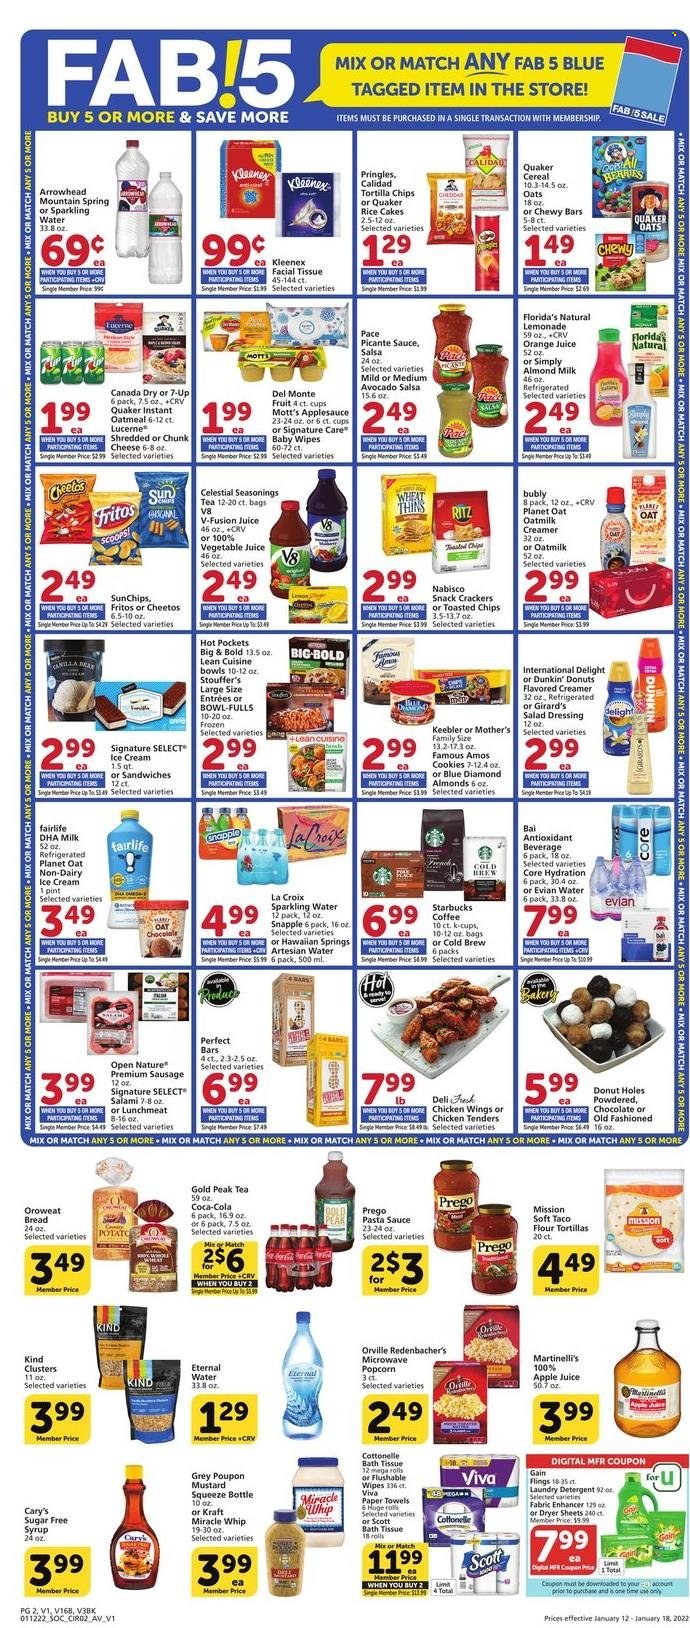 thumbnail - Vons Flyer - 01/12/2022 - 01/18/2022 - Sales products - bread, flour tortillas, donut holes, Dunkin' Donuts, avocado, Mott's, chicken tenders, chicken wings, hot pocket, pasta sauce, sandwich, Quaker, Lean Cuisine, bowl-fulls, Kraft®, salami, sausage, lunch meat, chunk cheese, almond milk, oat milk, creamer, Miracle Whip, ice cream, Stouffer's, cookies, snack, crackers, Florida's Natural, Keebler, RITZ, Fritos, tortilla chips, Pringles, Cheetos, Thins, oatmeal, cereals, rice, mustard, salad dressing, dressing, salsa, apple sauce, fruit jam, syrup, Blue Diamond, apple juice, Canada Dry, Coca-Cola, lemonade, orange juice, juice, 7UP, Snapple, Gold Peak Tea, vegetable juice, Bai, sparkling water, Evian, tea, coffee, Starbucks, coffee capsules, K-Cups, wipes, baby wipes, bath tissue, Cottonelle, Kleenex, Scott, kitchen towels, paper towels, detergent, Gain, laundry detergent, dryer sheets. Page 2.